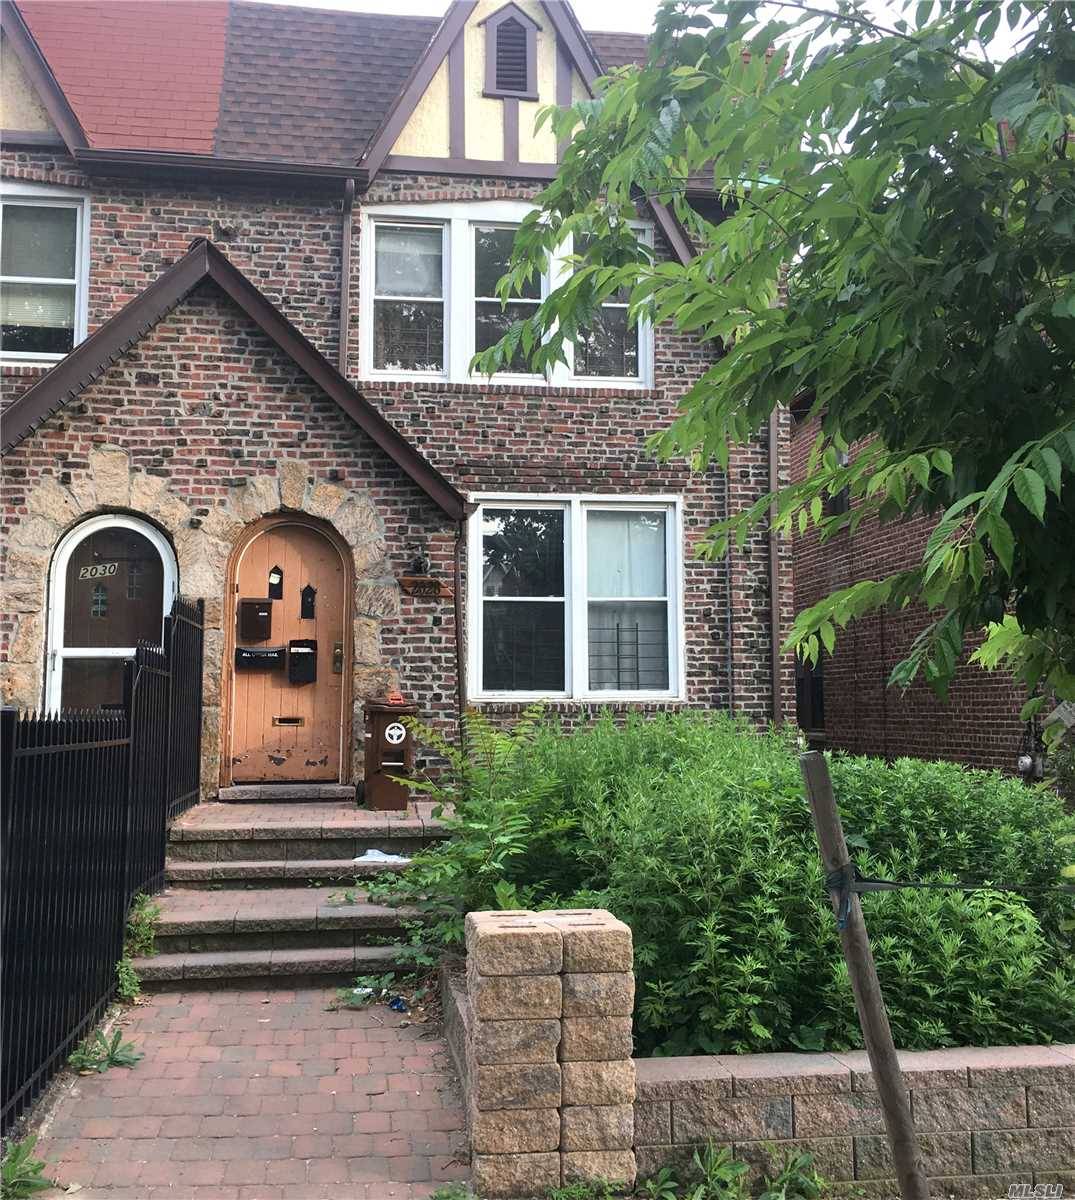 Semi-Attached Brick Three Family House With Full/Finished Basement And One Car Garage.